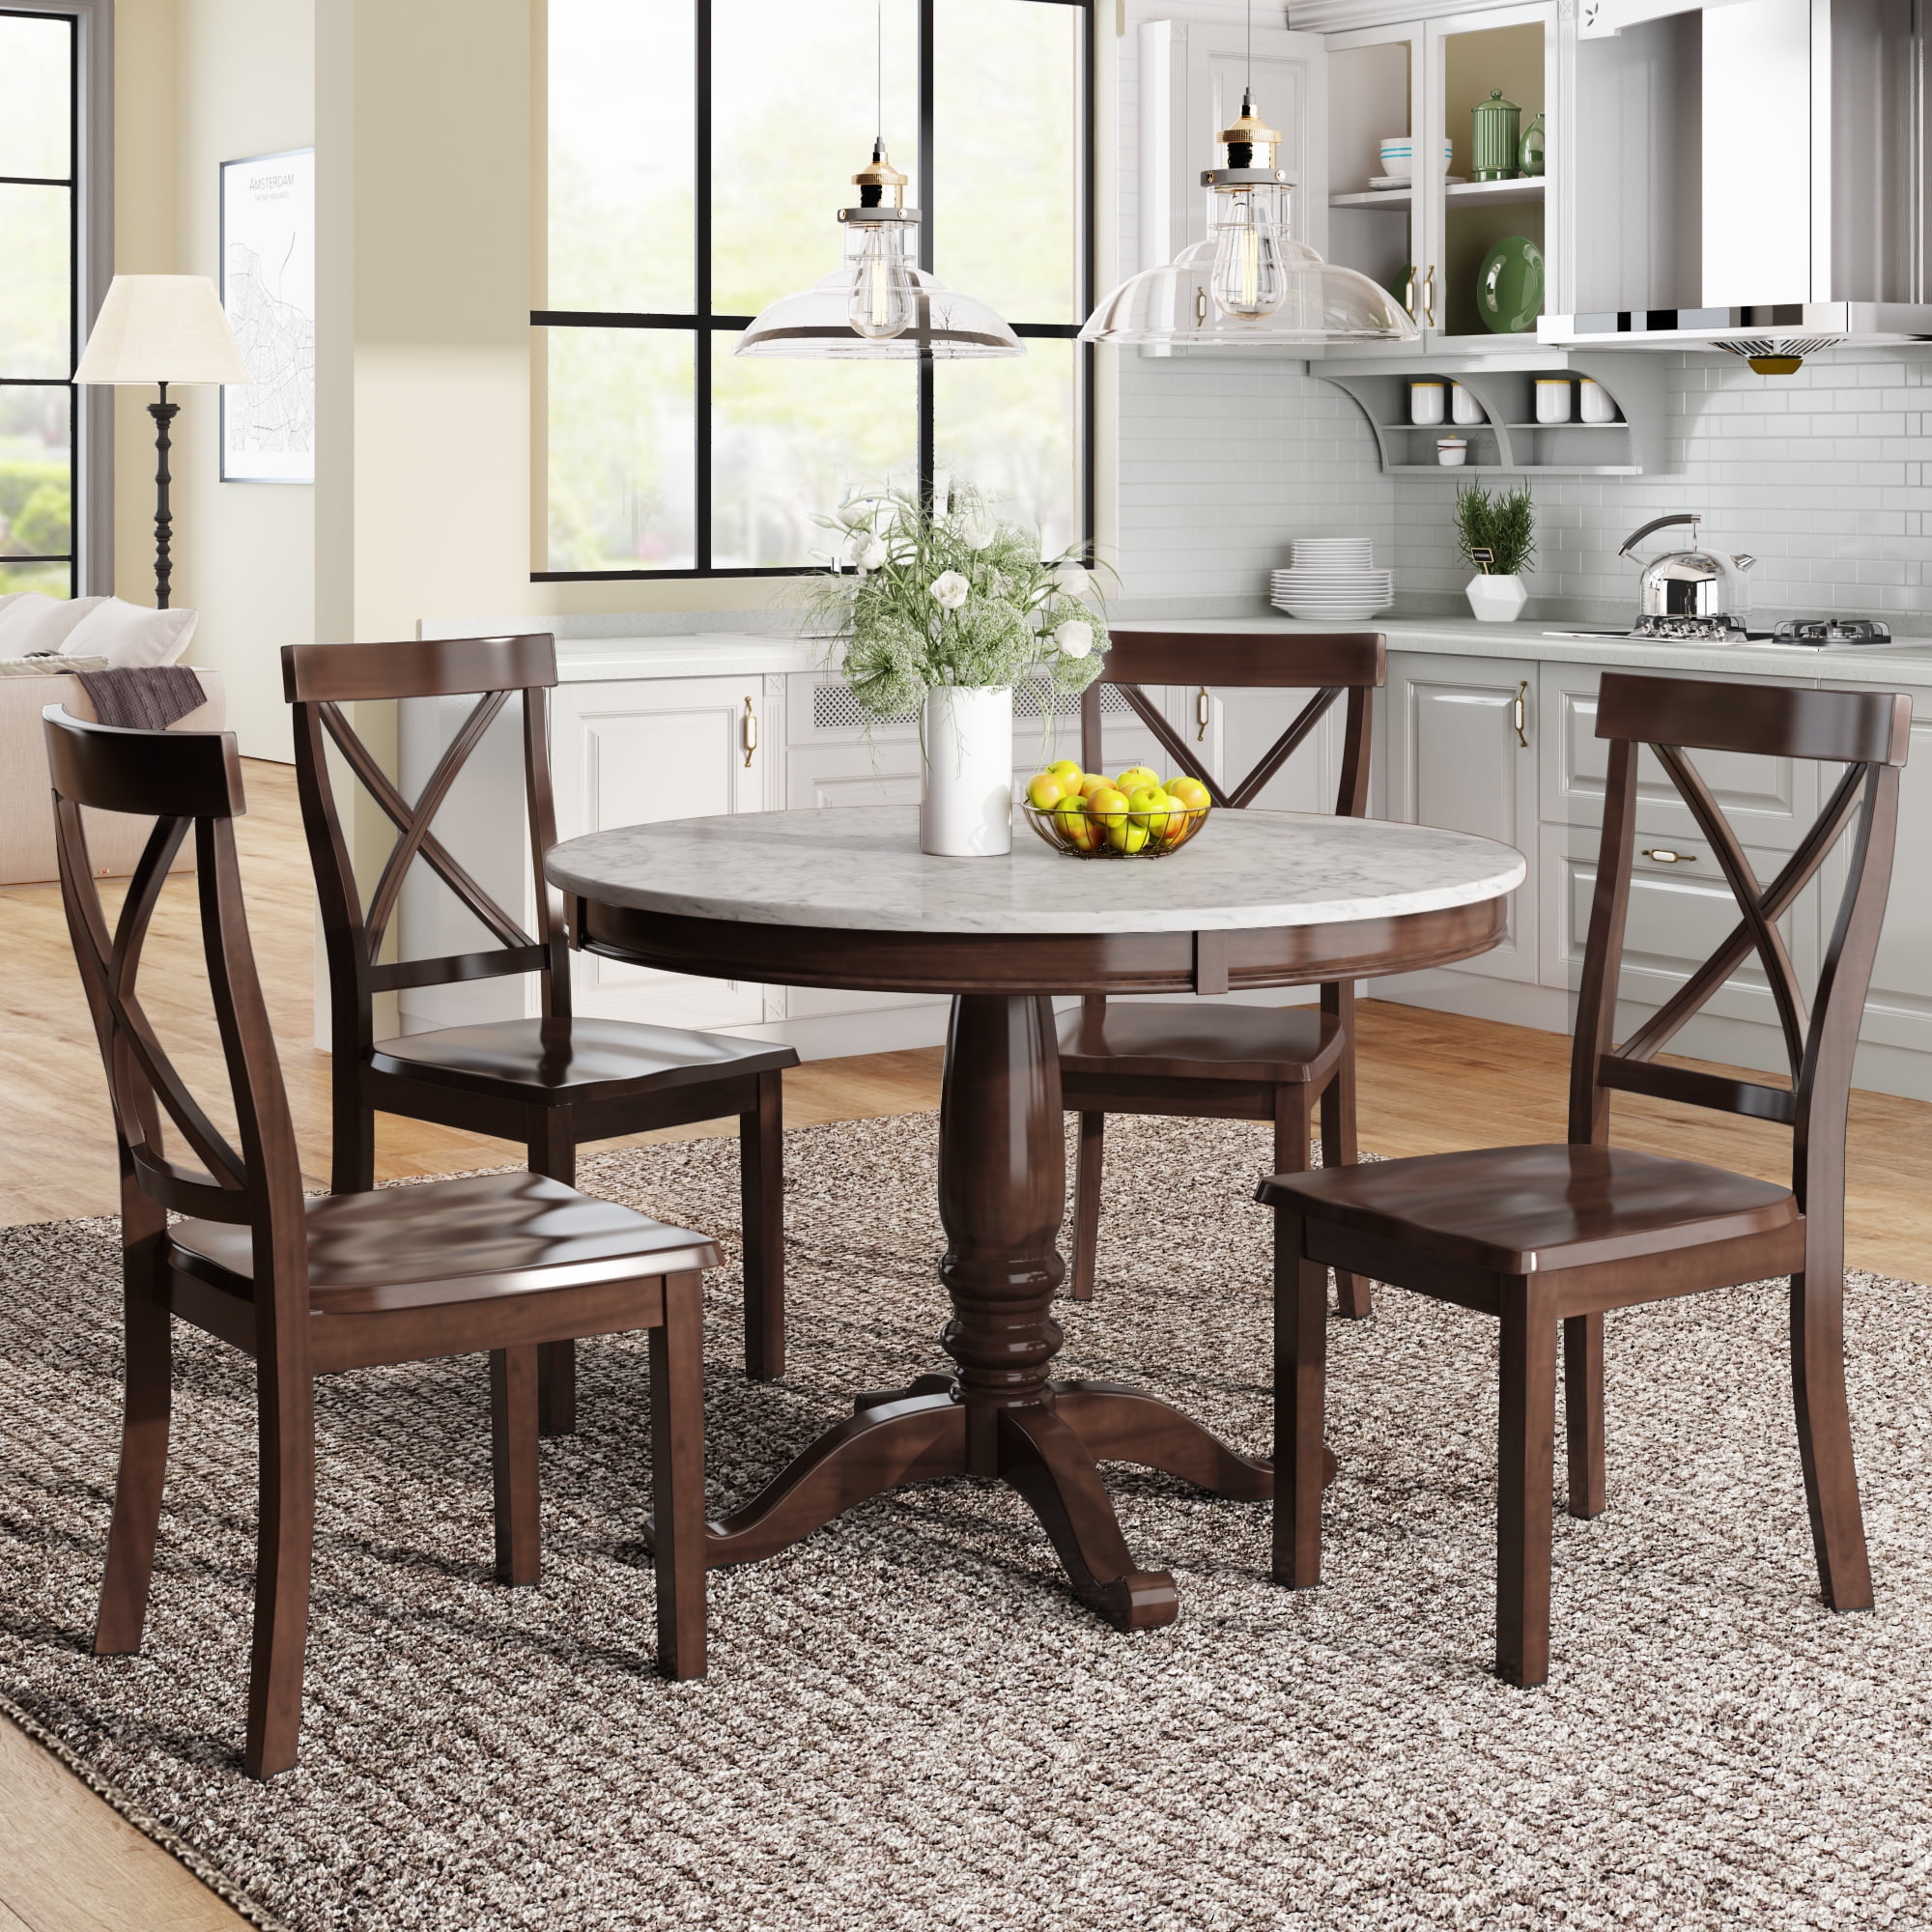 Wood Dining Kitchen Table Set, Cyber Monday Dining Room Setup